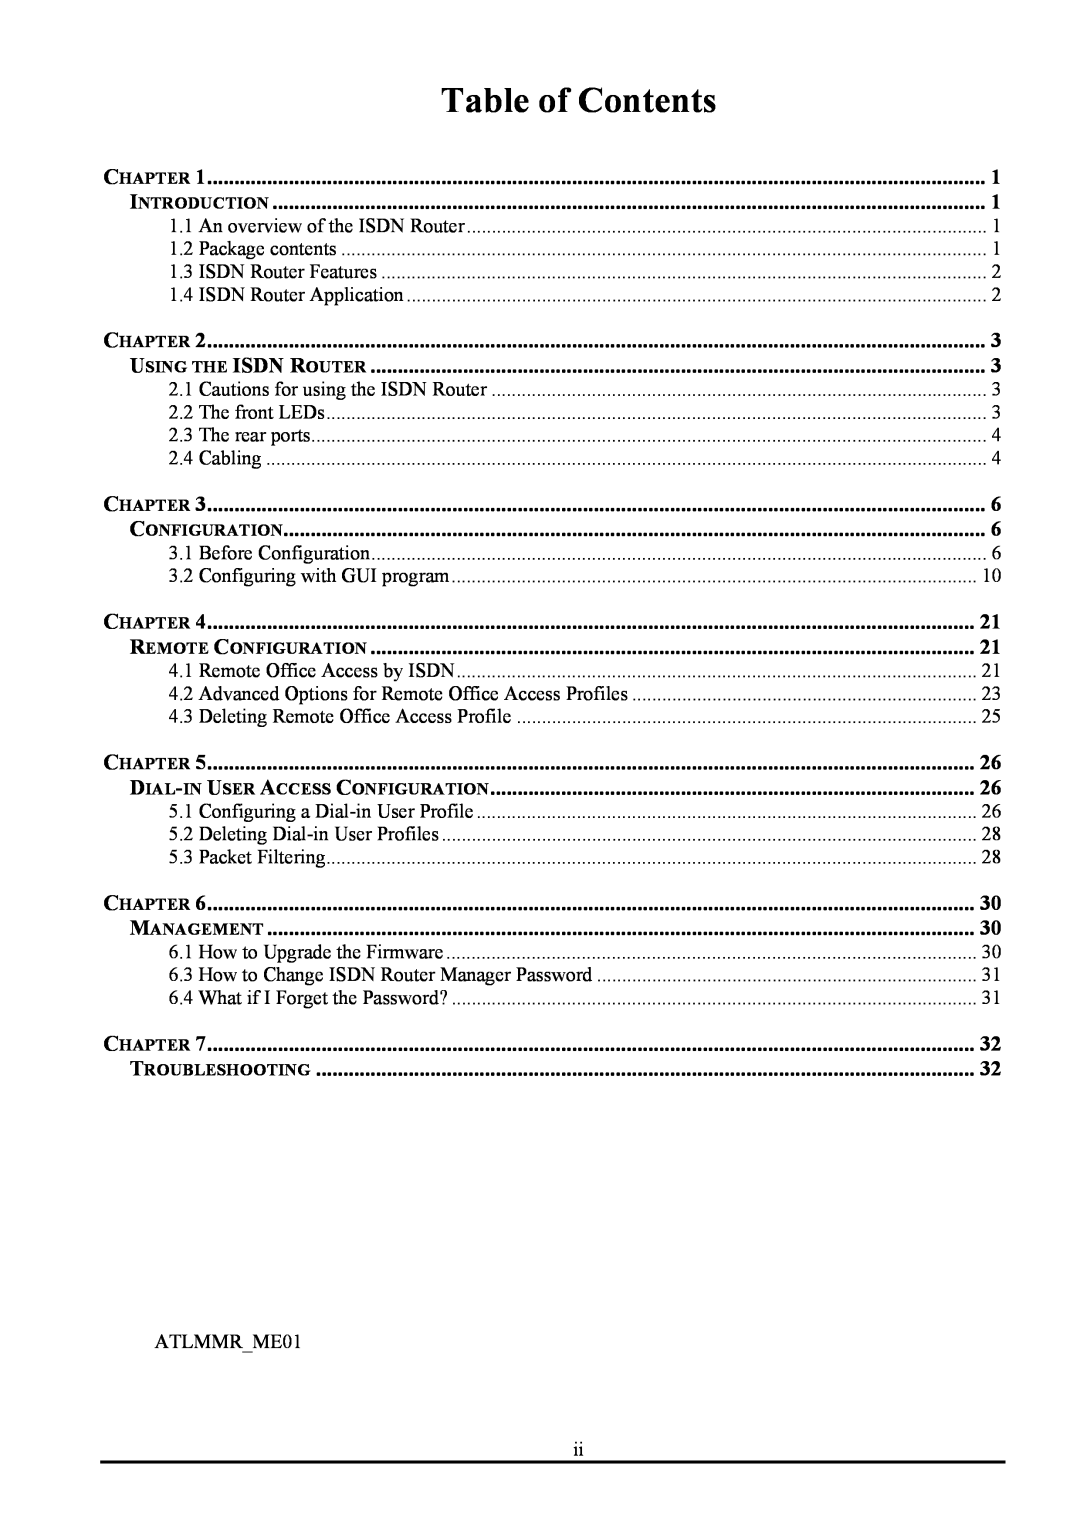 Atlantis Land ATLMMR MNE01 user manual Table of Contents 